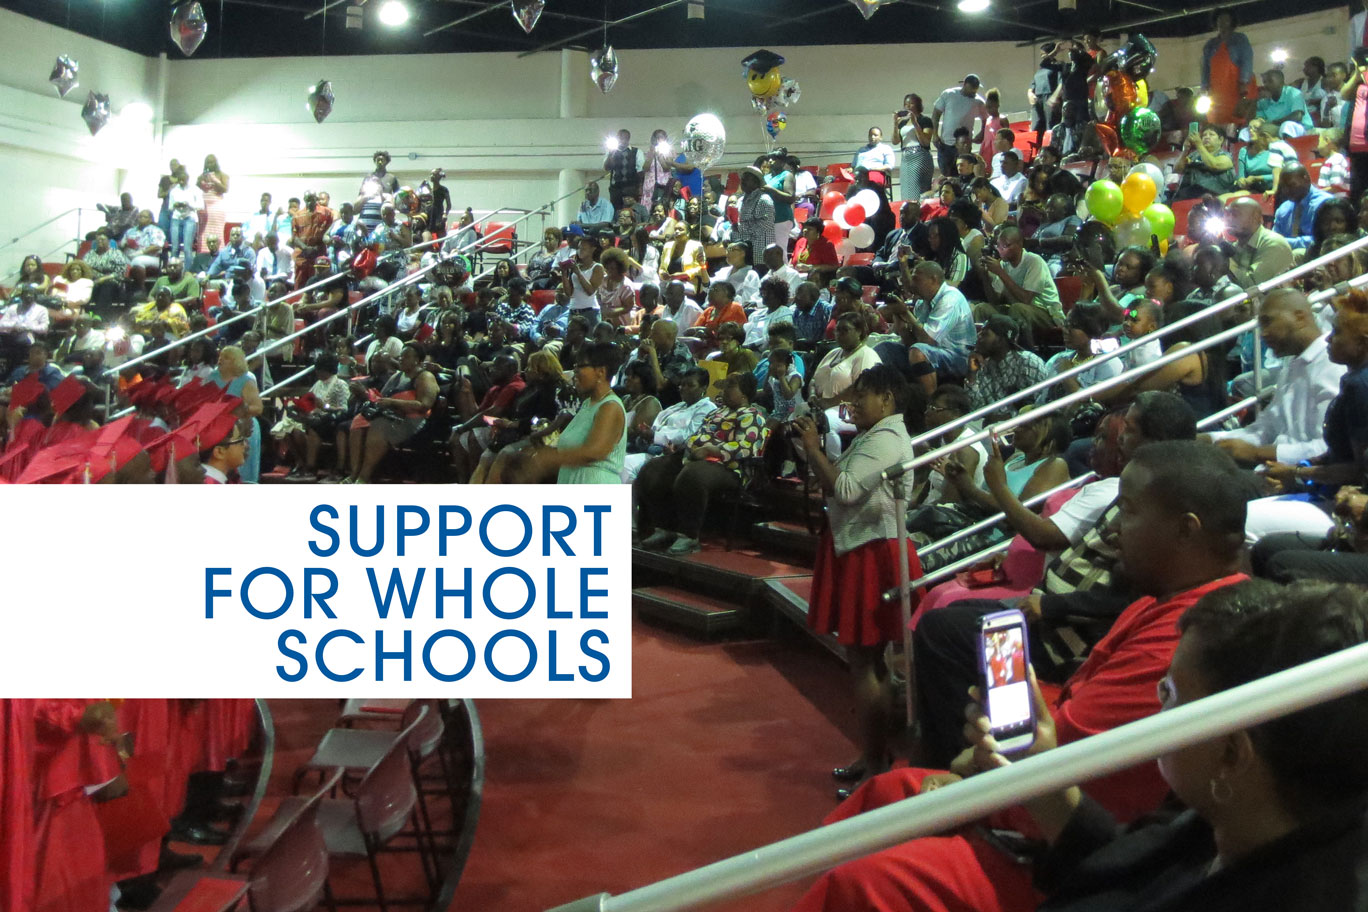 SUPPORT FOR WHOLE SCHOOLS